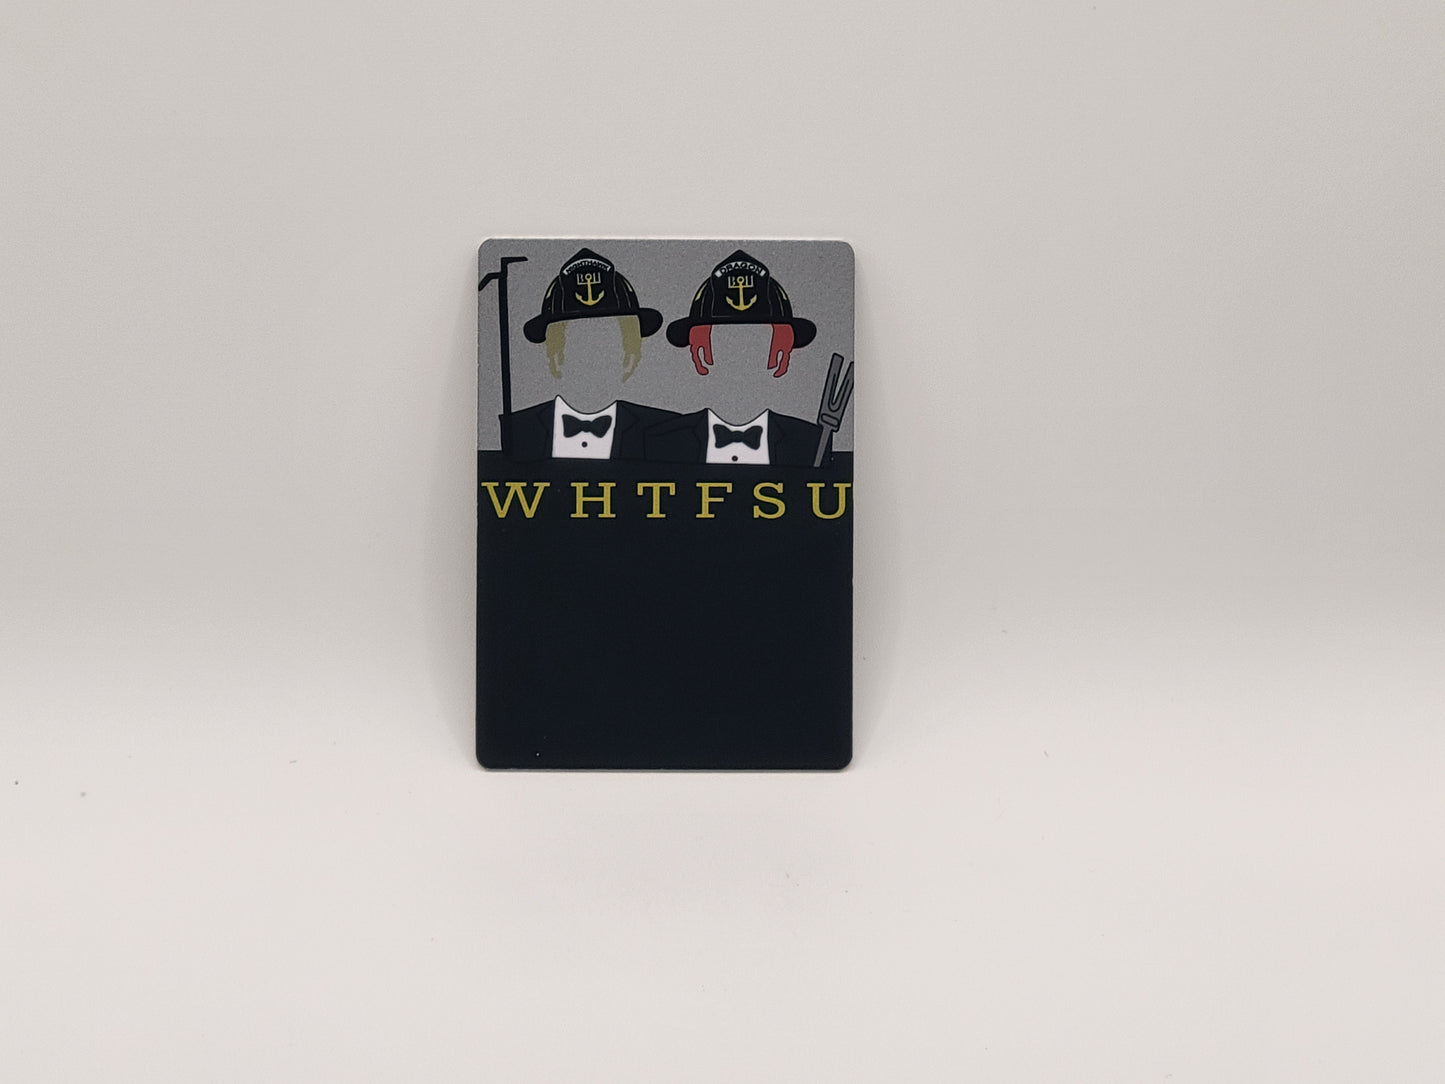 WHTFSU, step brothers version 1 playing card